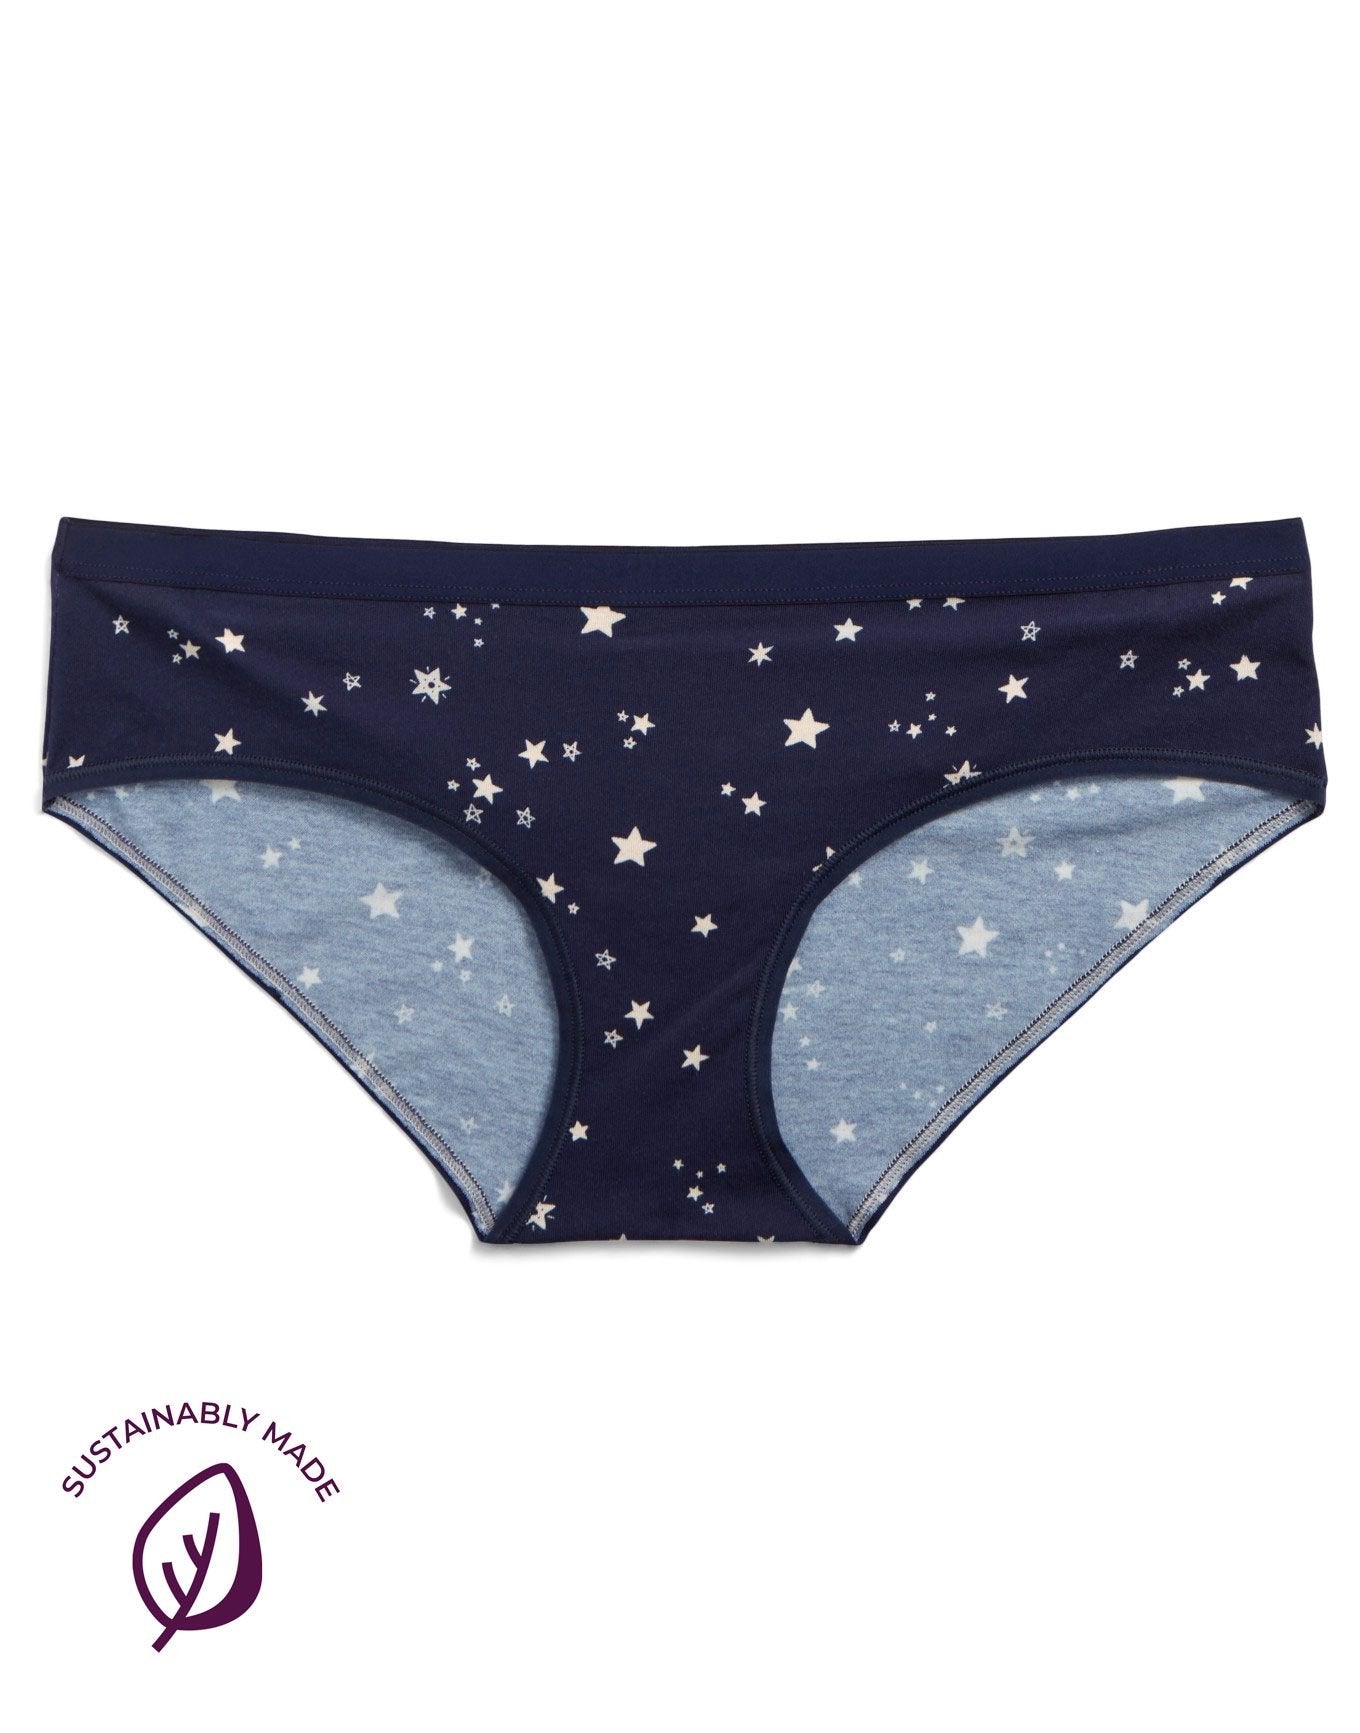 Adore Me Brooklyn Cotton Hipster in color Into the Stars C03 and shape hipster